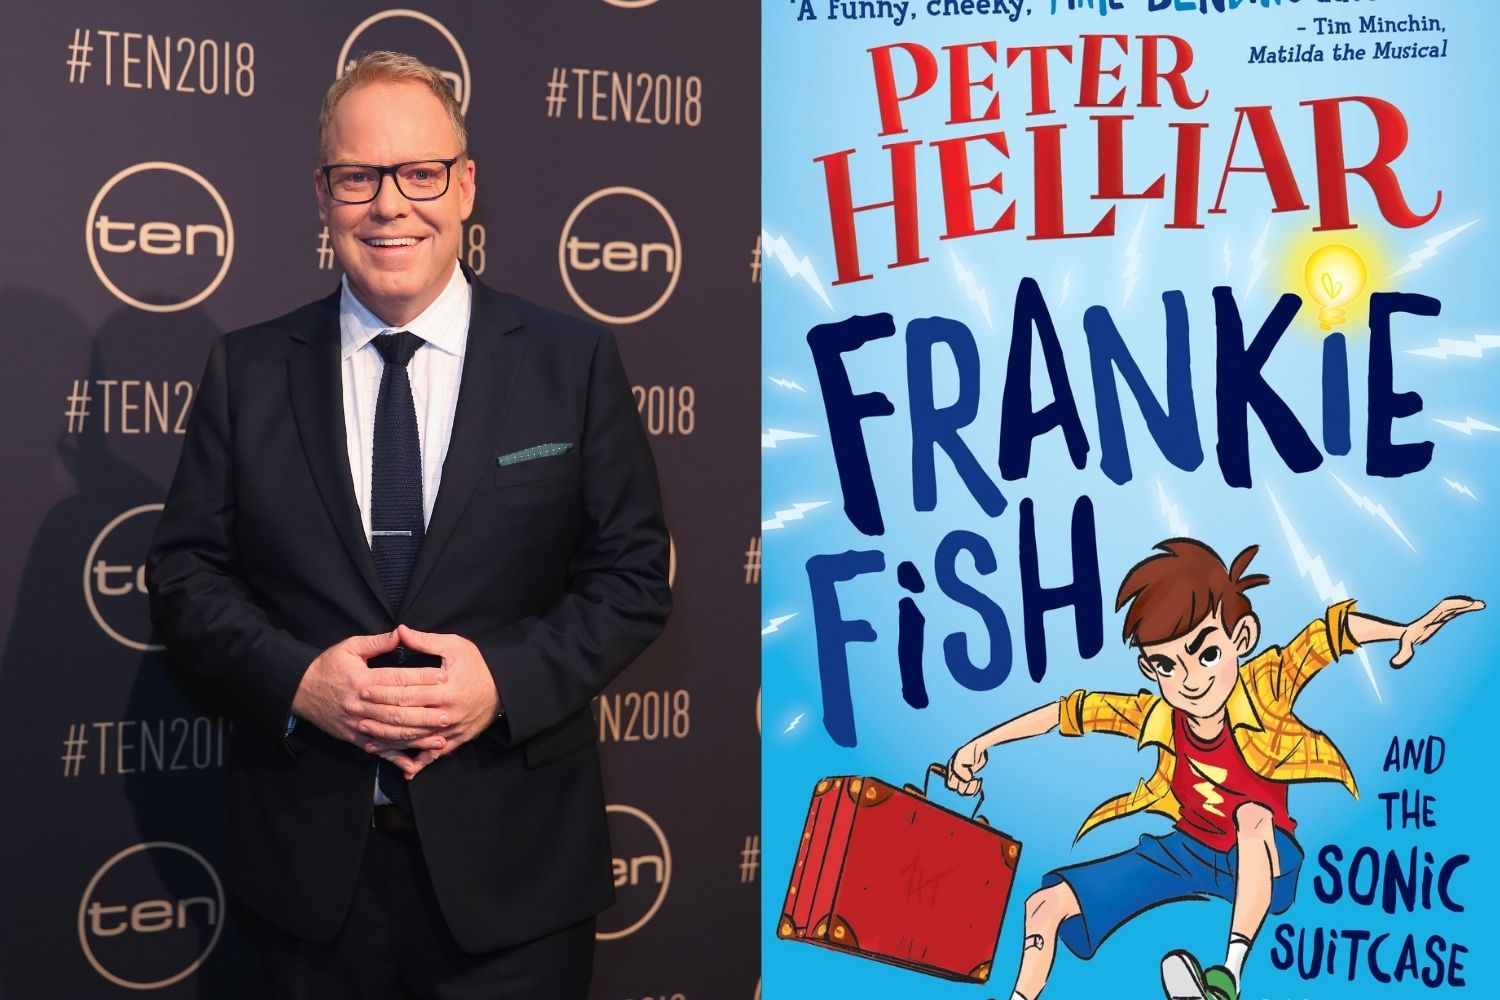 Peter Helliar book Frankie Fish and the Sonic suitcase